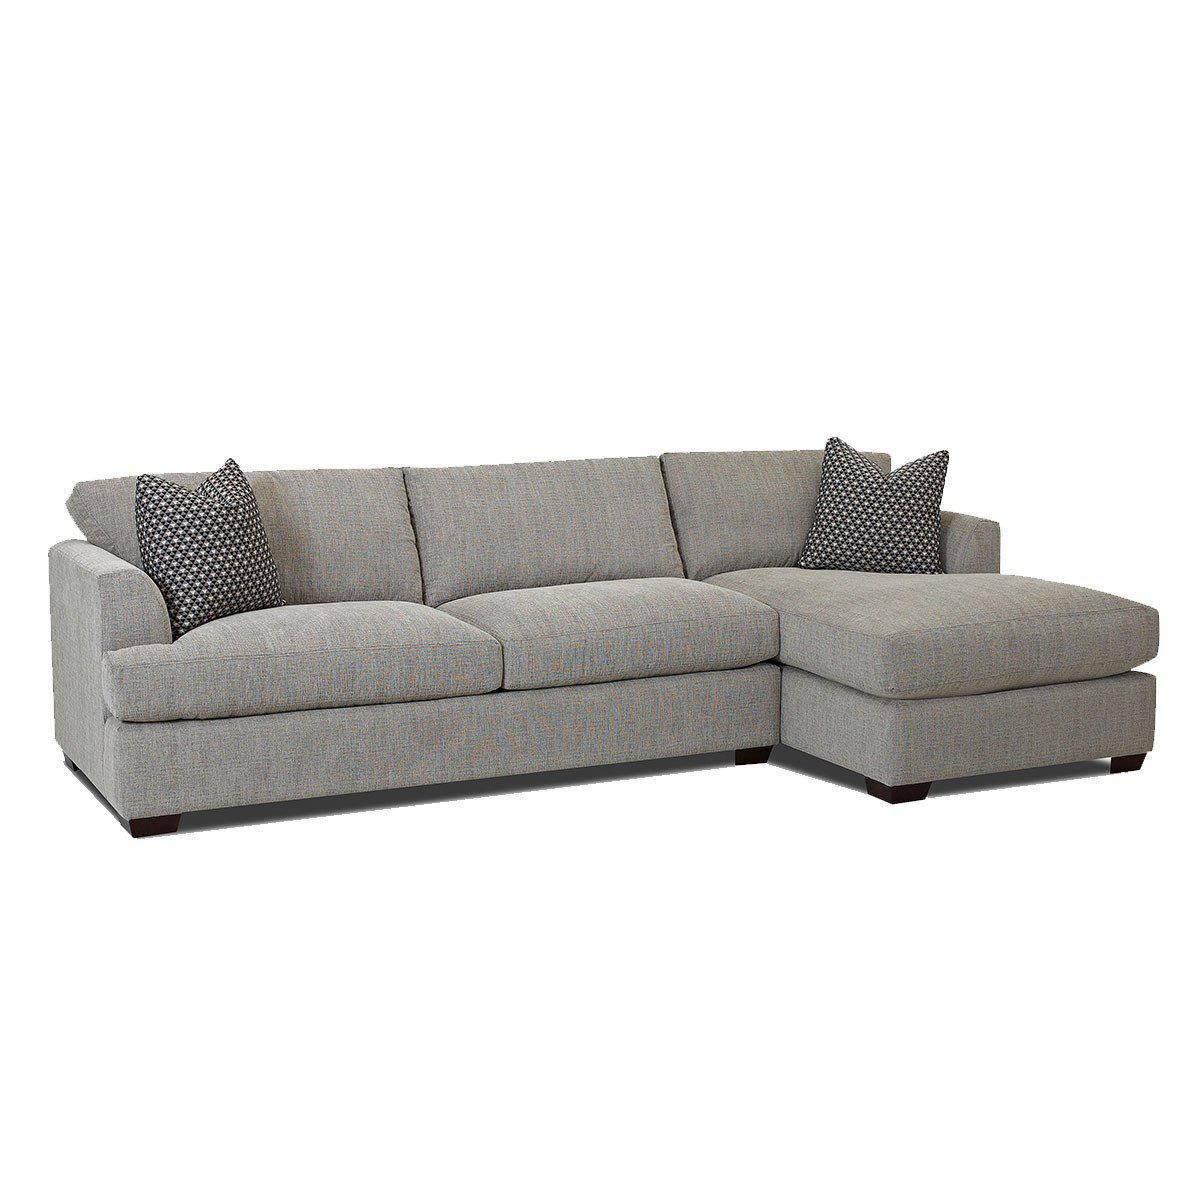 Jennifer Furniture'S Bentley 2 Piece Sectional Comes In Intended For 2Pc Maddox Left Arm Facing Sectional Sofas With Chaise Brown (View 14 of 15)